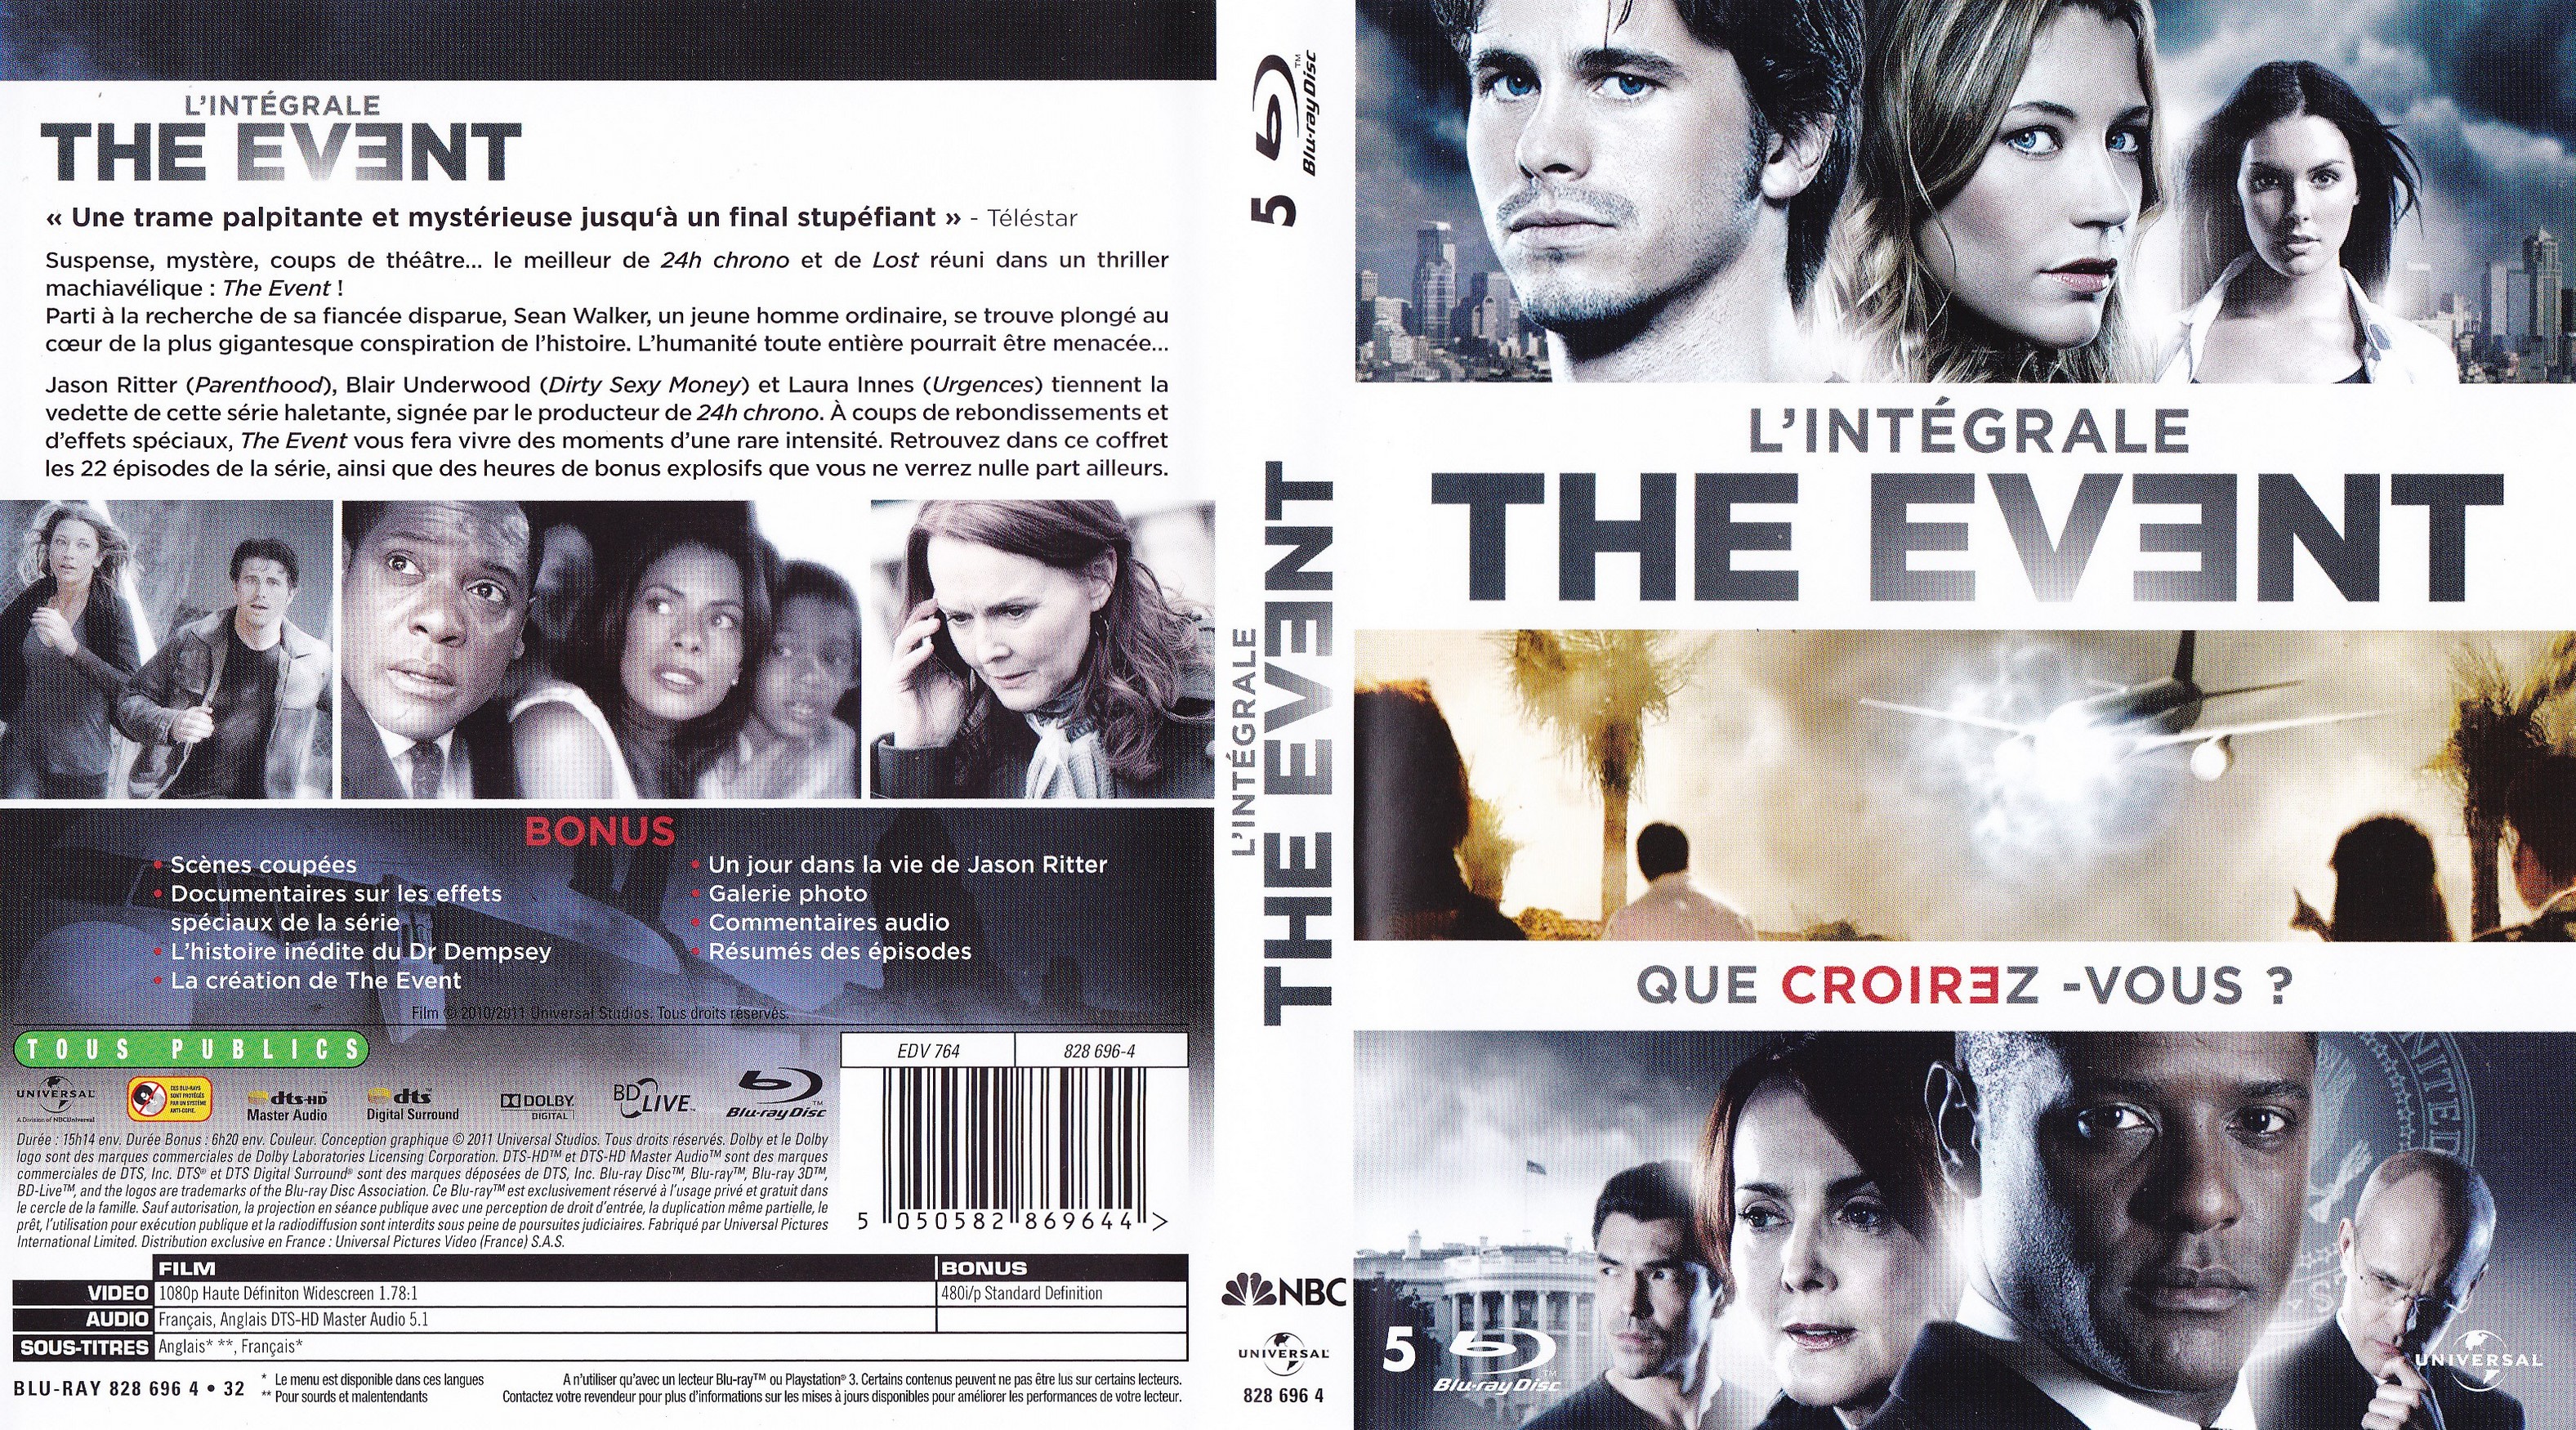 Jaquette DVD The event (BLU-RAY)